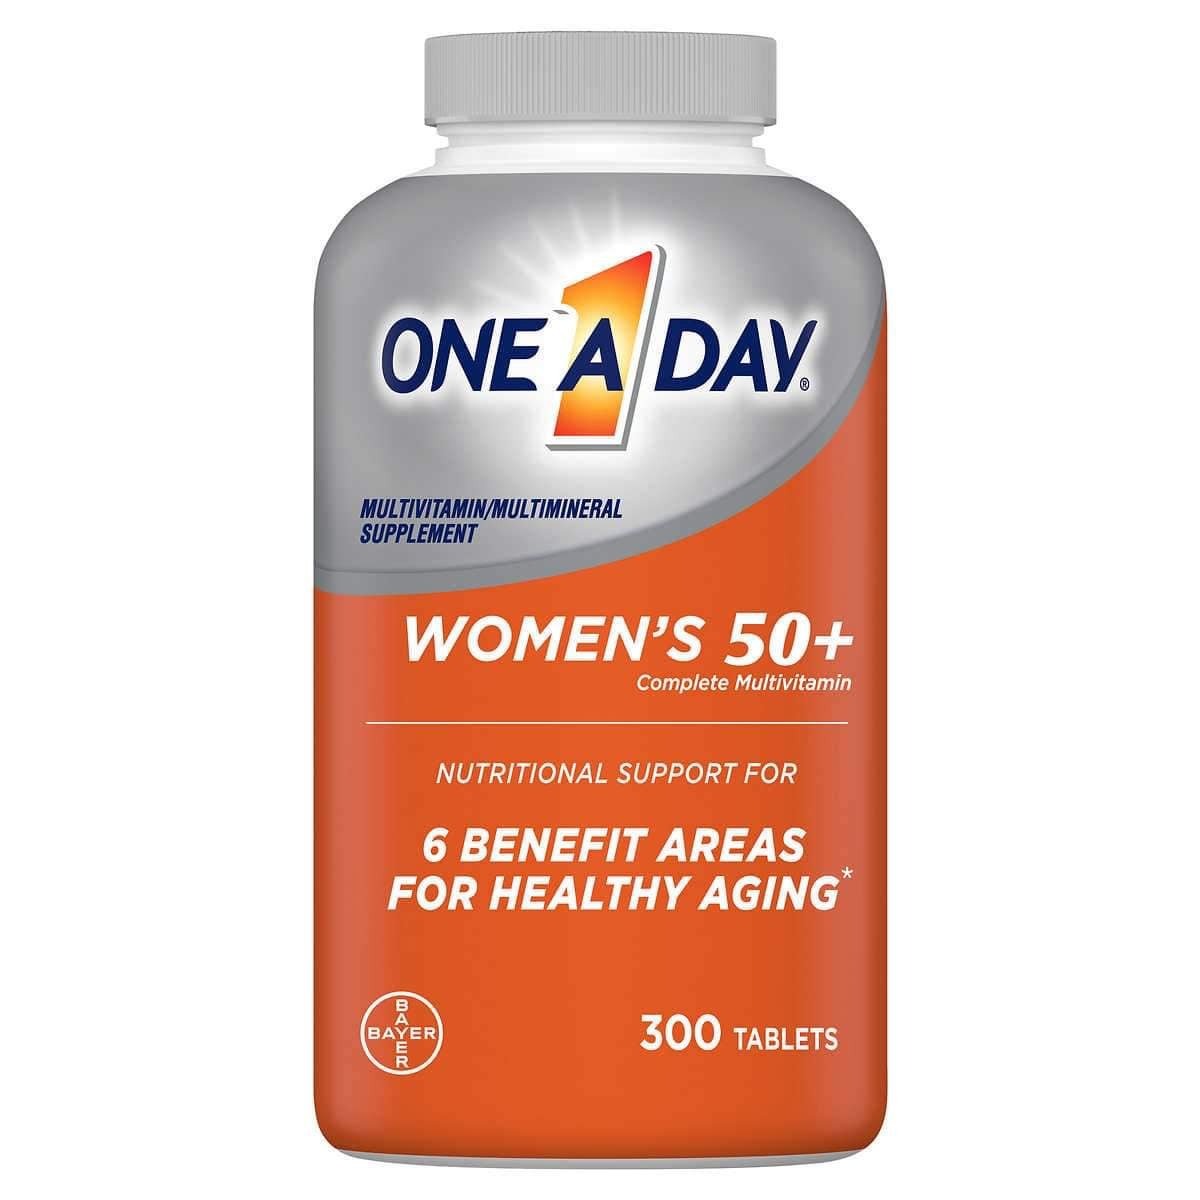 vien uong bo sung multivitamin one a day womens 50 complete new